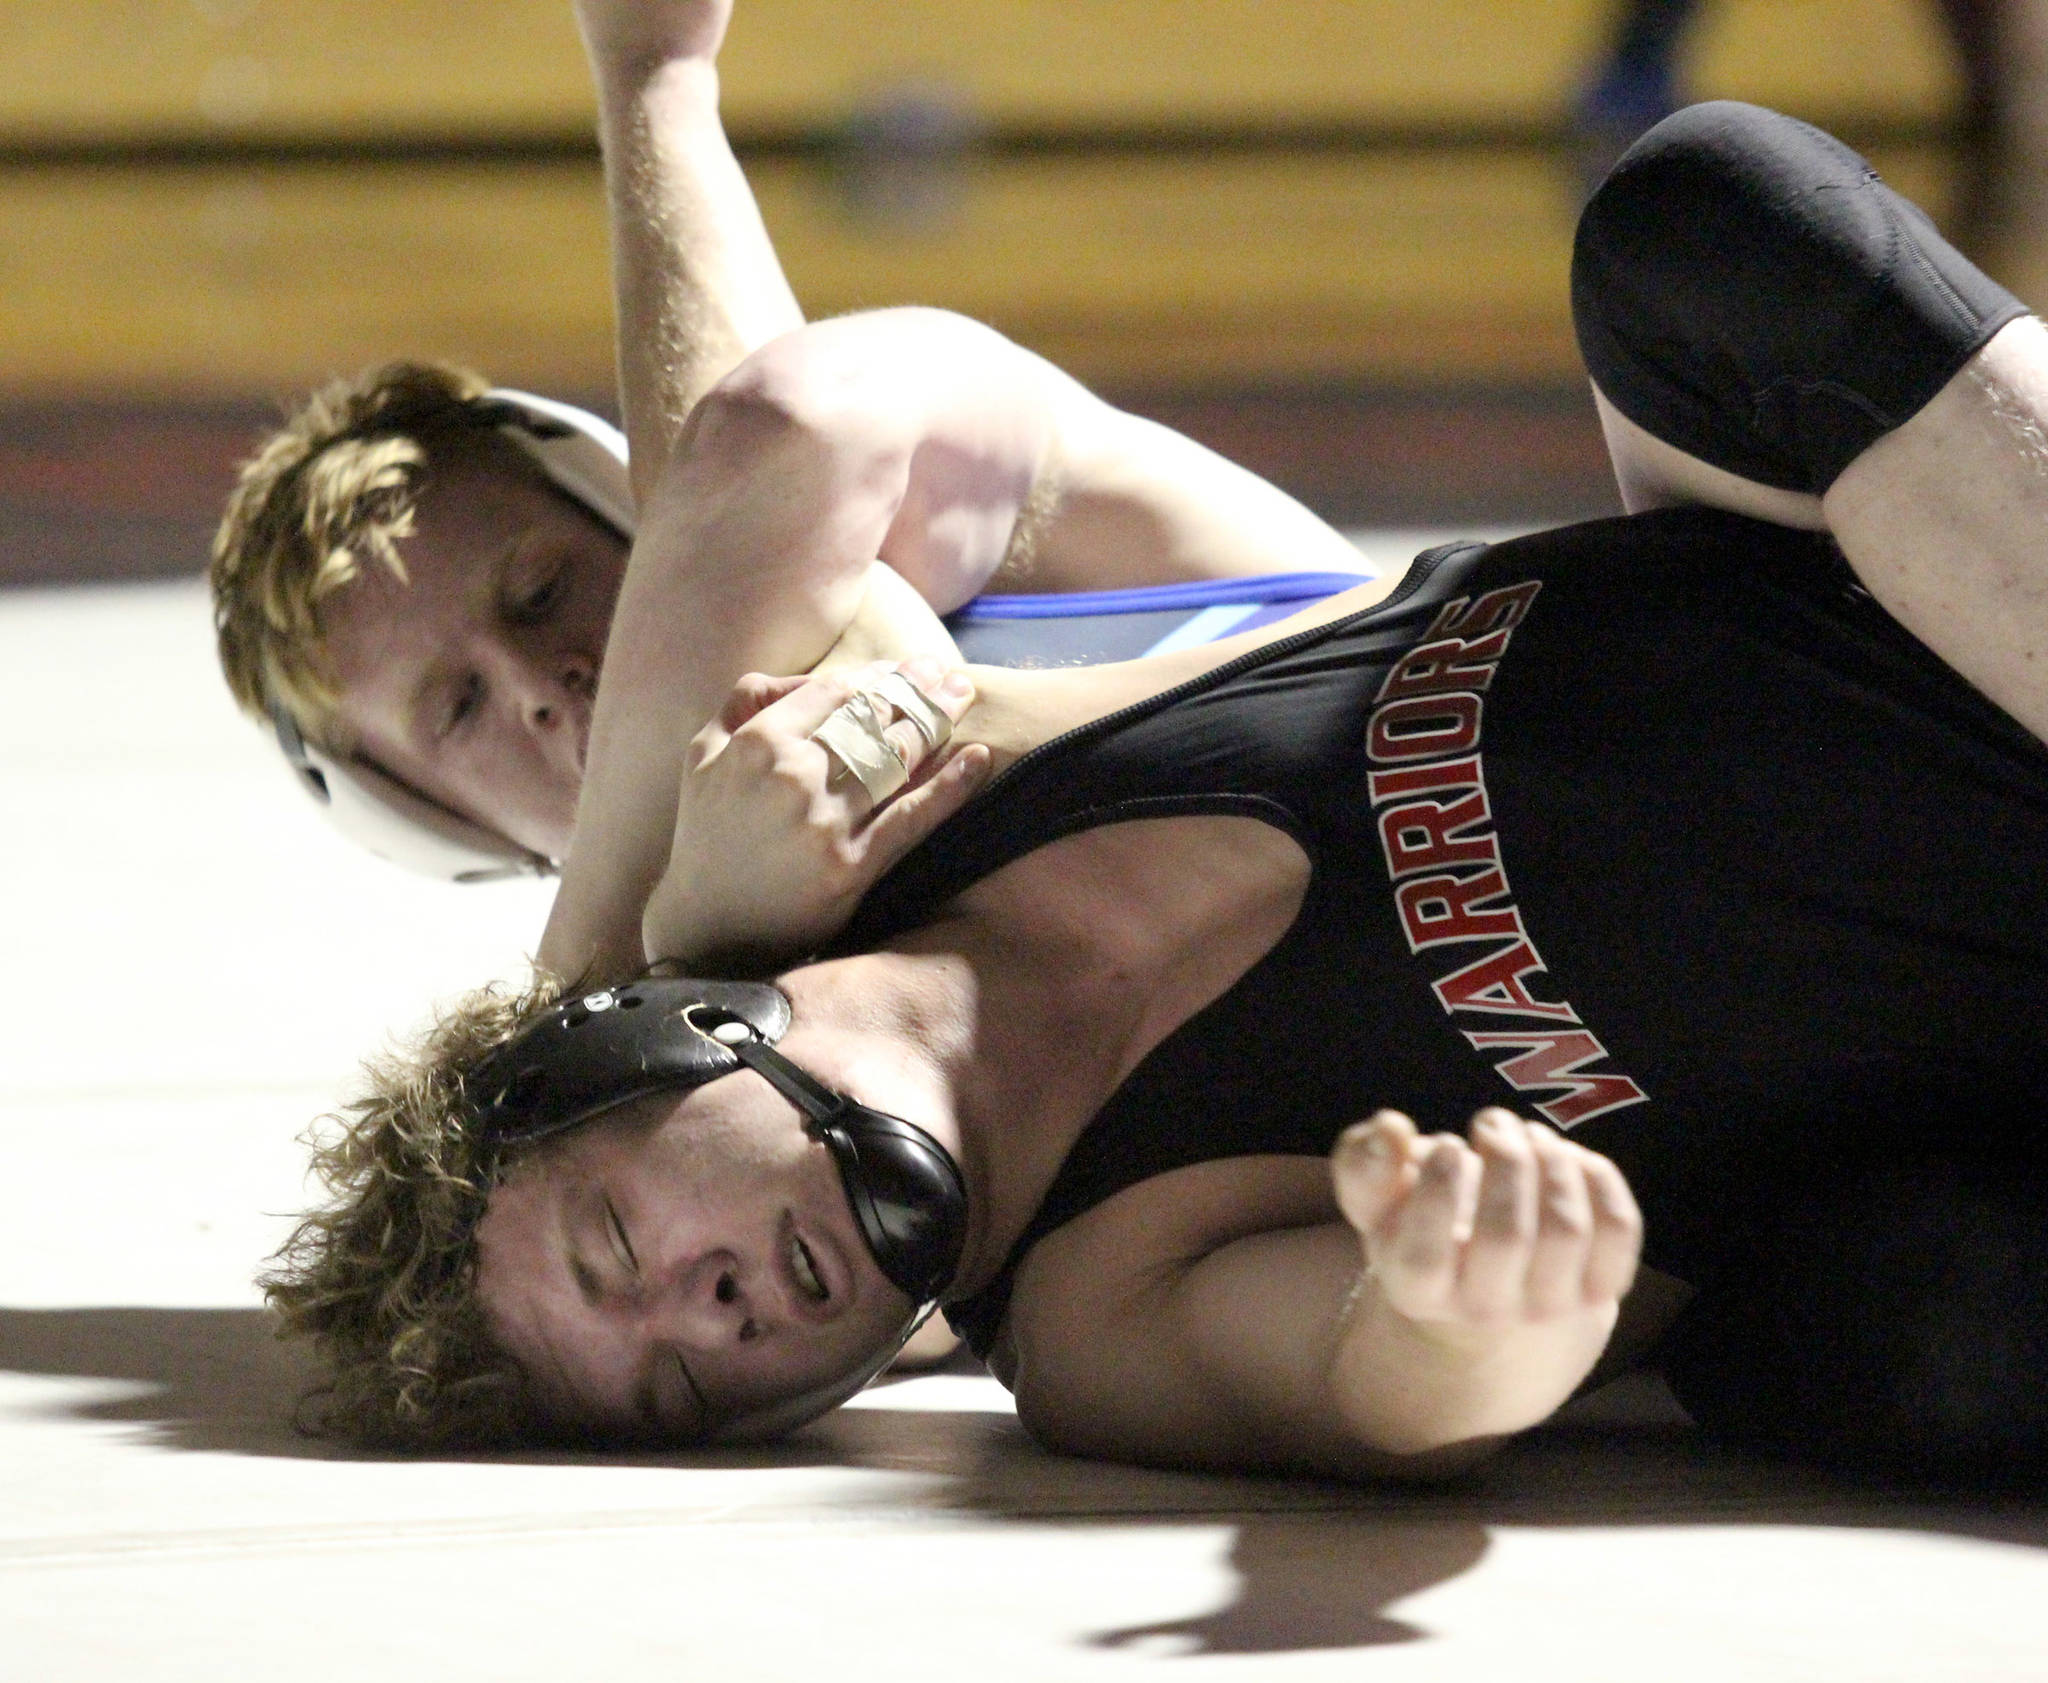 Soldotna’s Sean Babbit tries to pull Wasilla’s Colton Lindquist to his back during the 189-pound final of the Northern Lights Conference tournament Friday, May 14, 2021, at Wasilla High School in Wasilla, Alaska. (Photo by Jeremiah Bartz/Frontiersman)